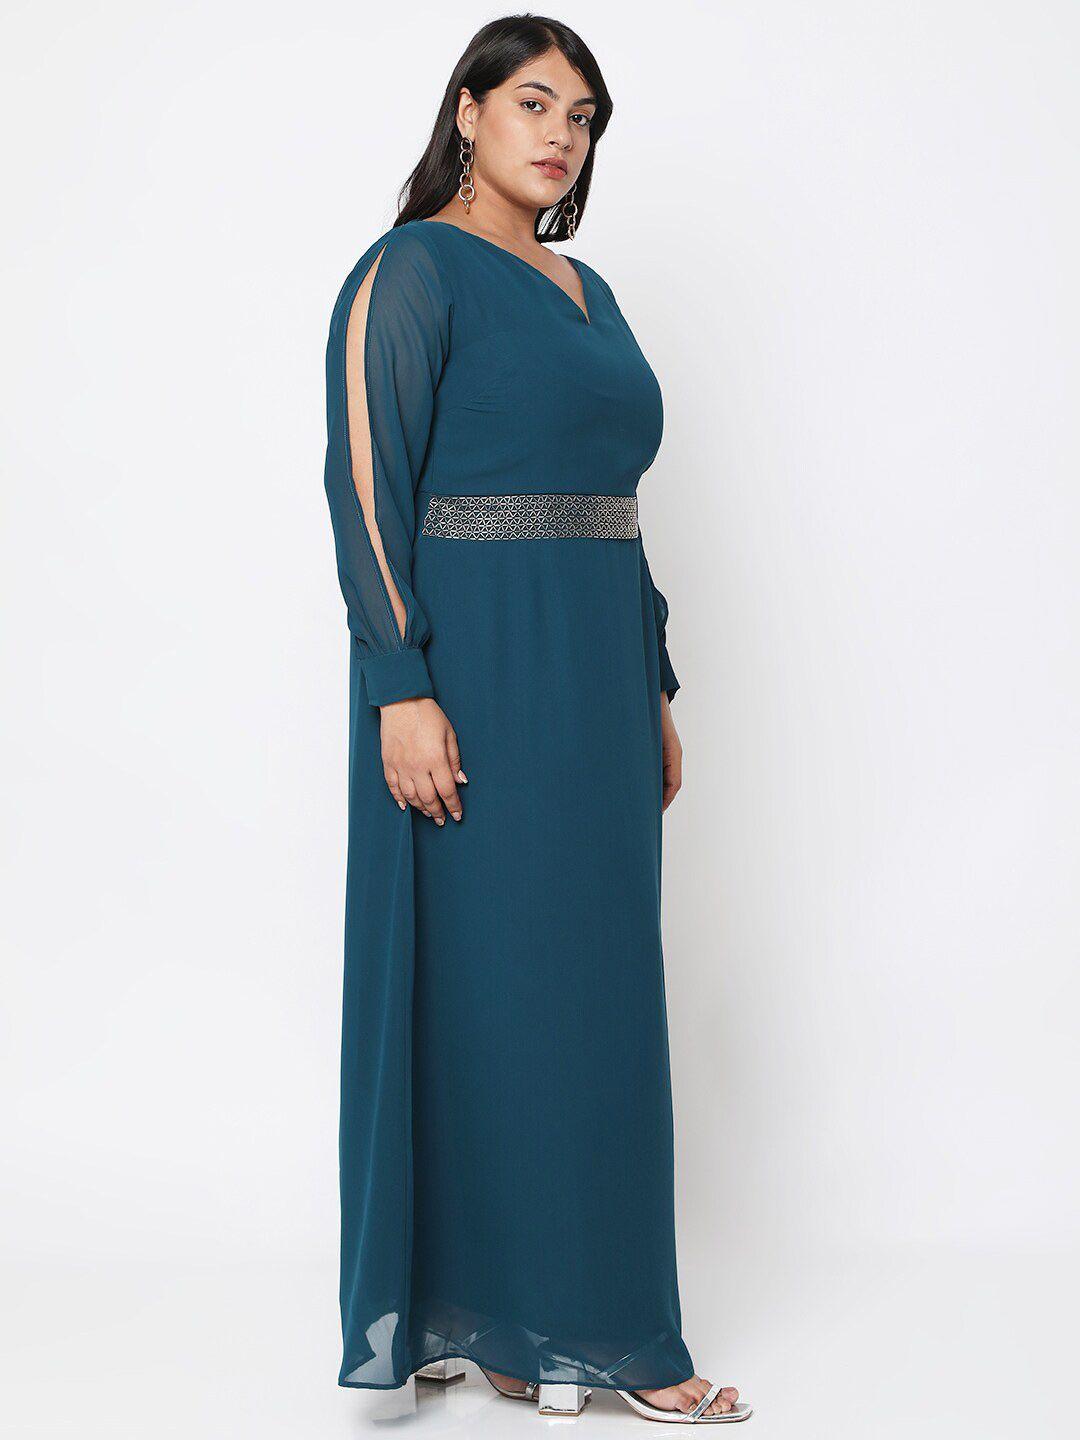 curves by mish teal plus size georgette maxi dress